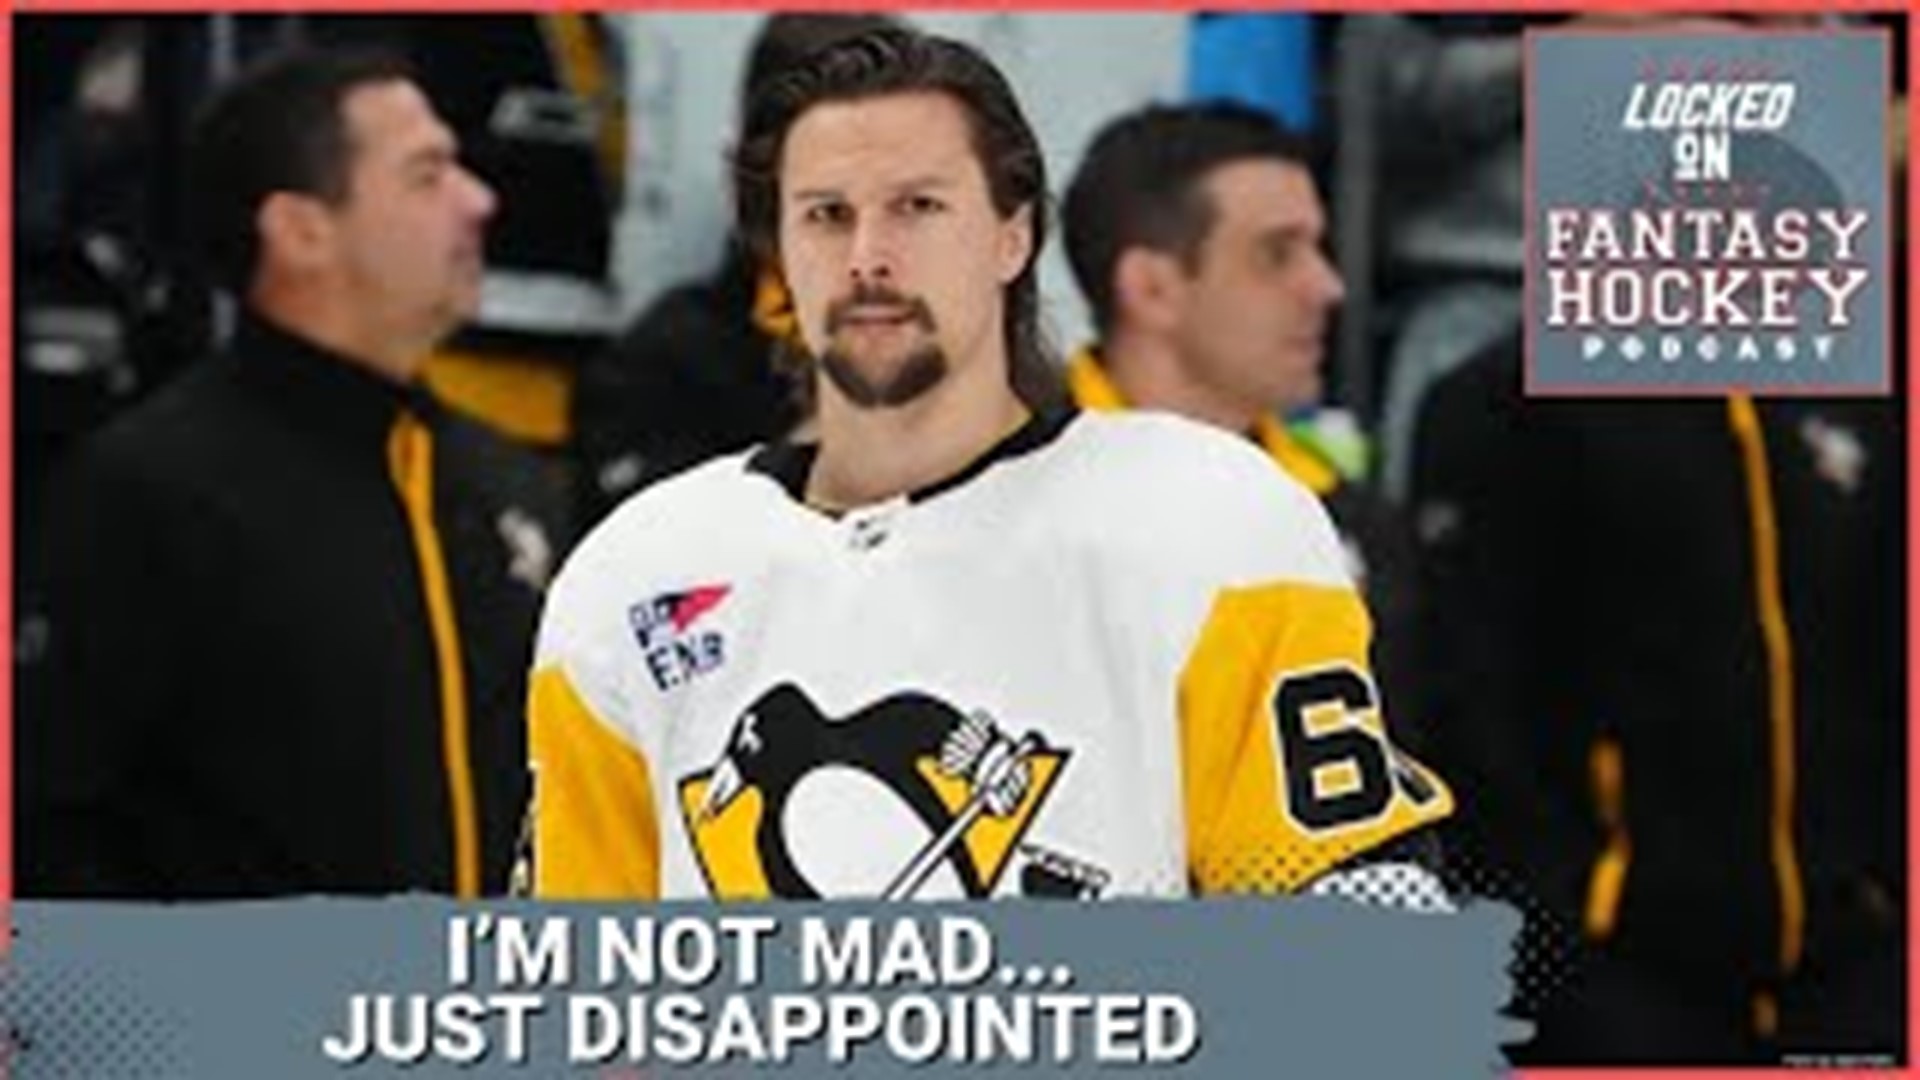 On Tuesday's episode, Flip and Steele discuss the ten most disappointing fantasy hockey players this season. Matty Beniers, Filip Gustavsson, Tage Thompson, and more